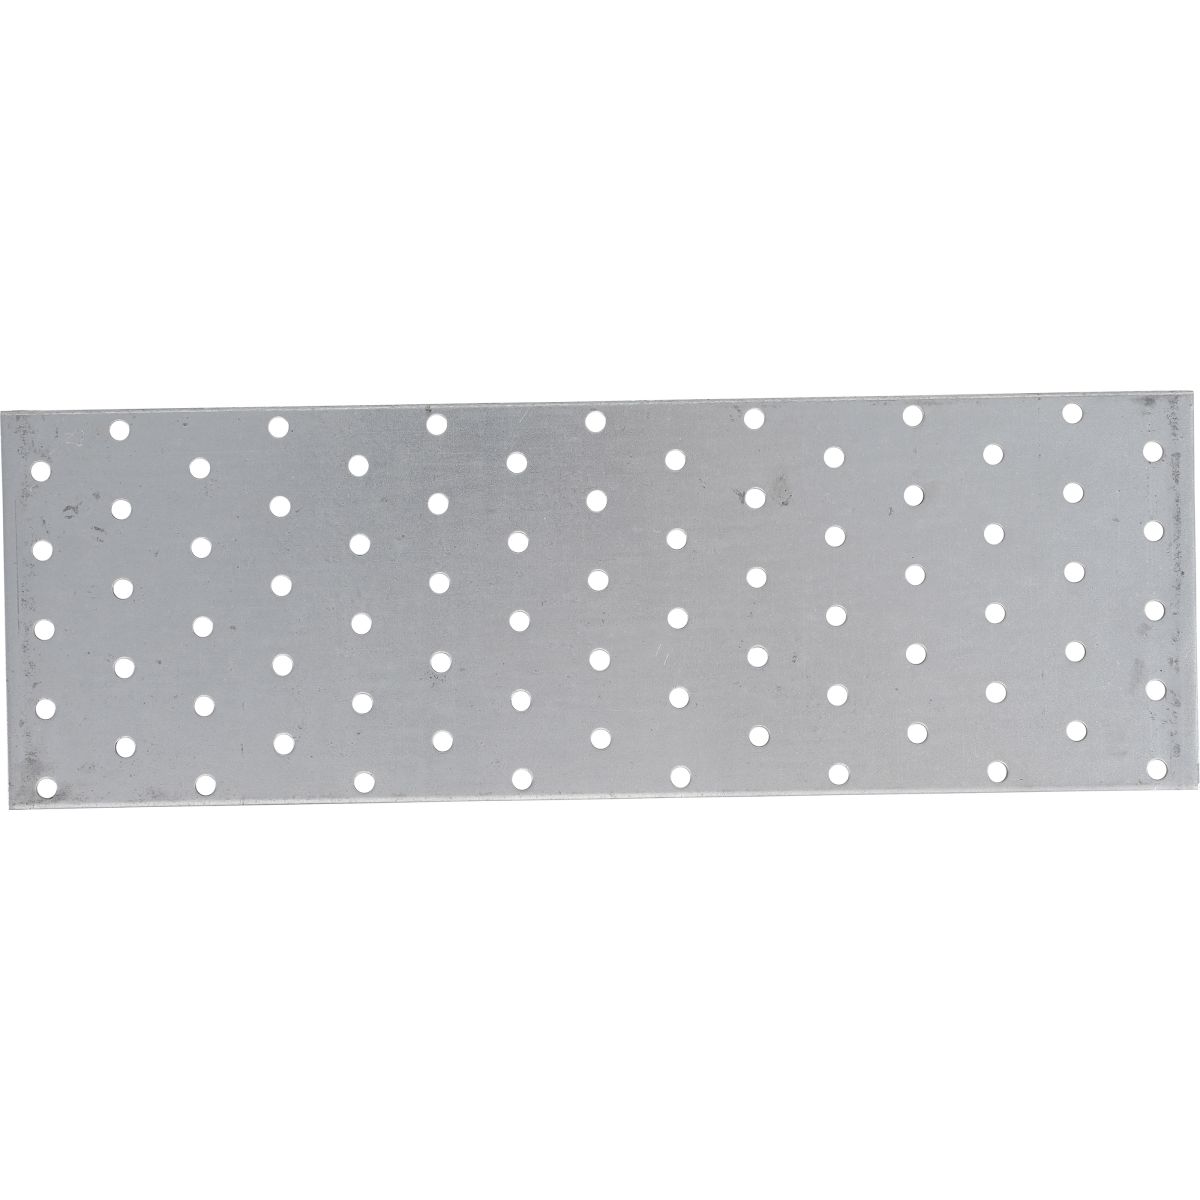 Steel Plate with Holes | 300 x 100 x 2 mm